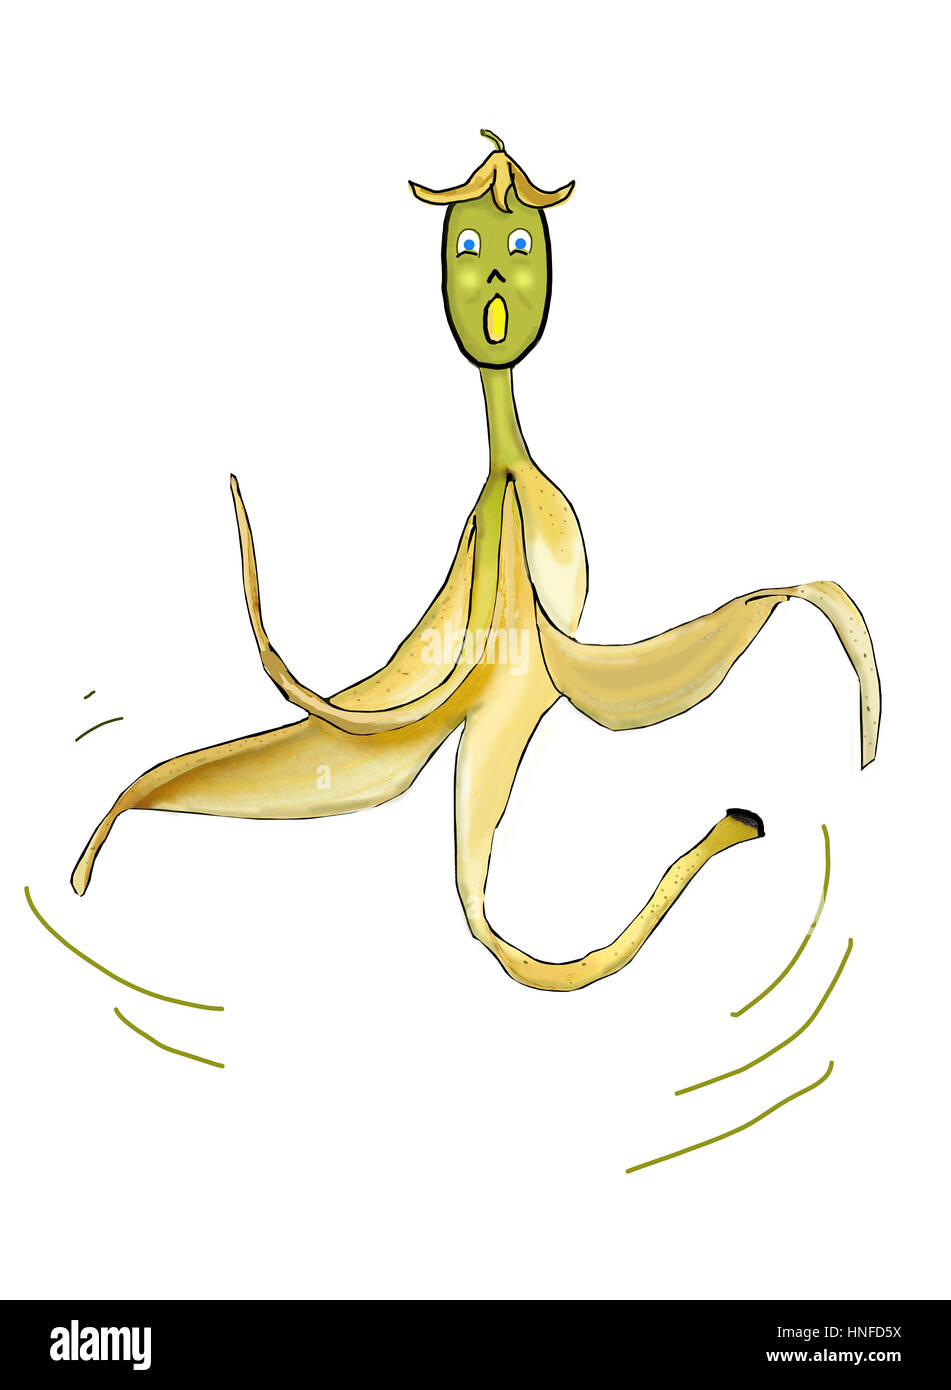 An illustration of a banana peel with a surprised face. Concept, slip and fall, accident, danger, injury, medical, medical insurance, shock, surprise. Stock Photo